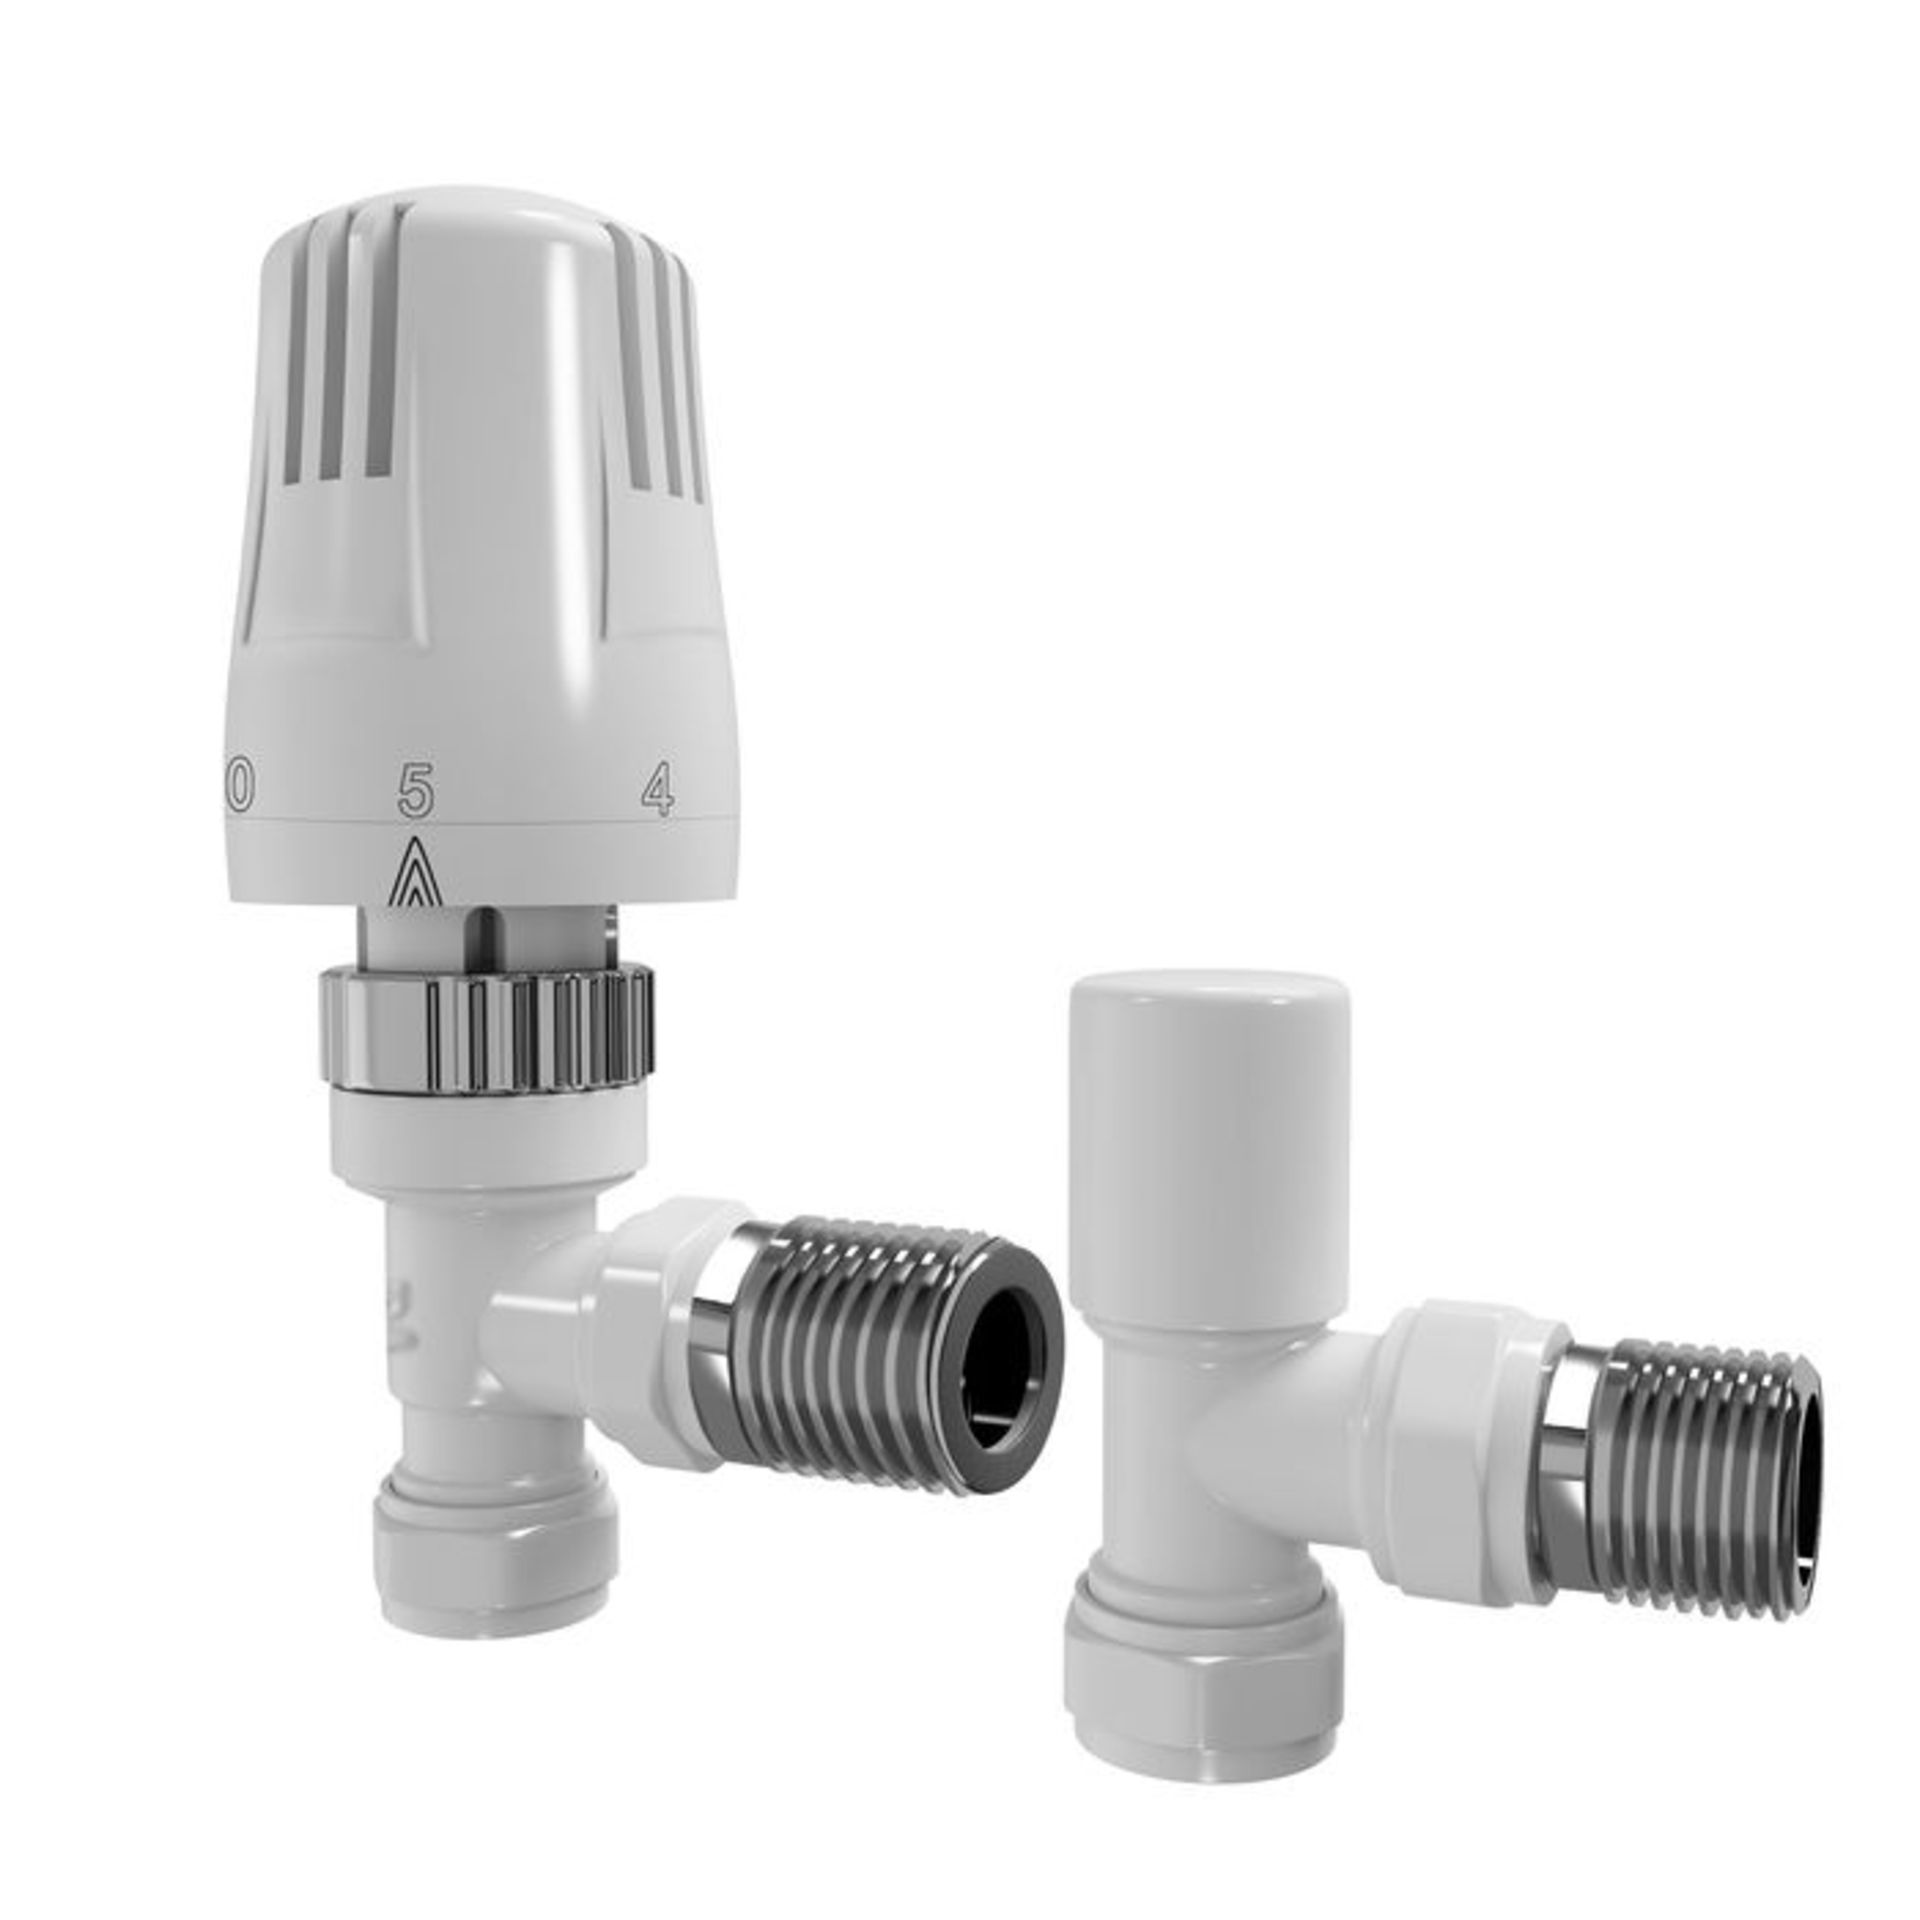 (G26) 15mm Standard Connection Thermostatic Angled Gloss White Radiator Valves Solid brass construct